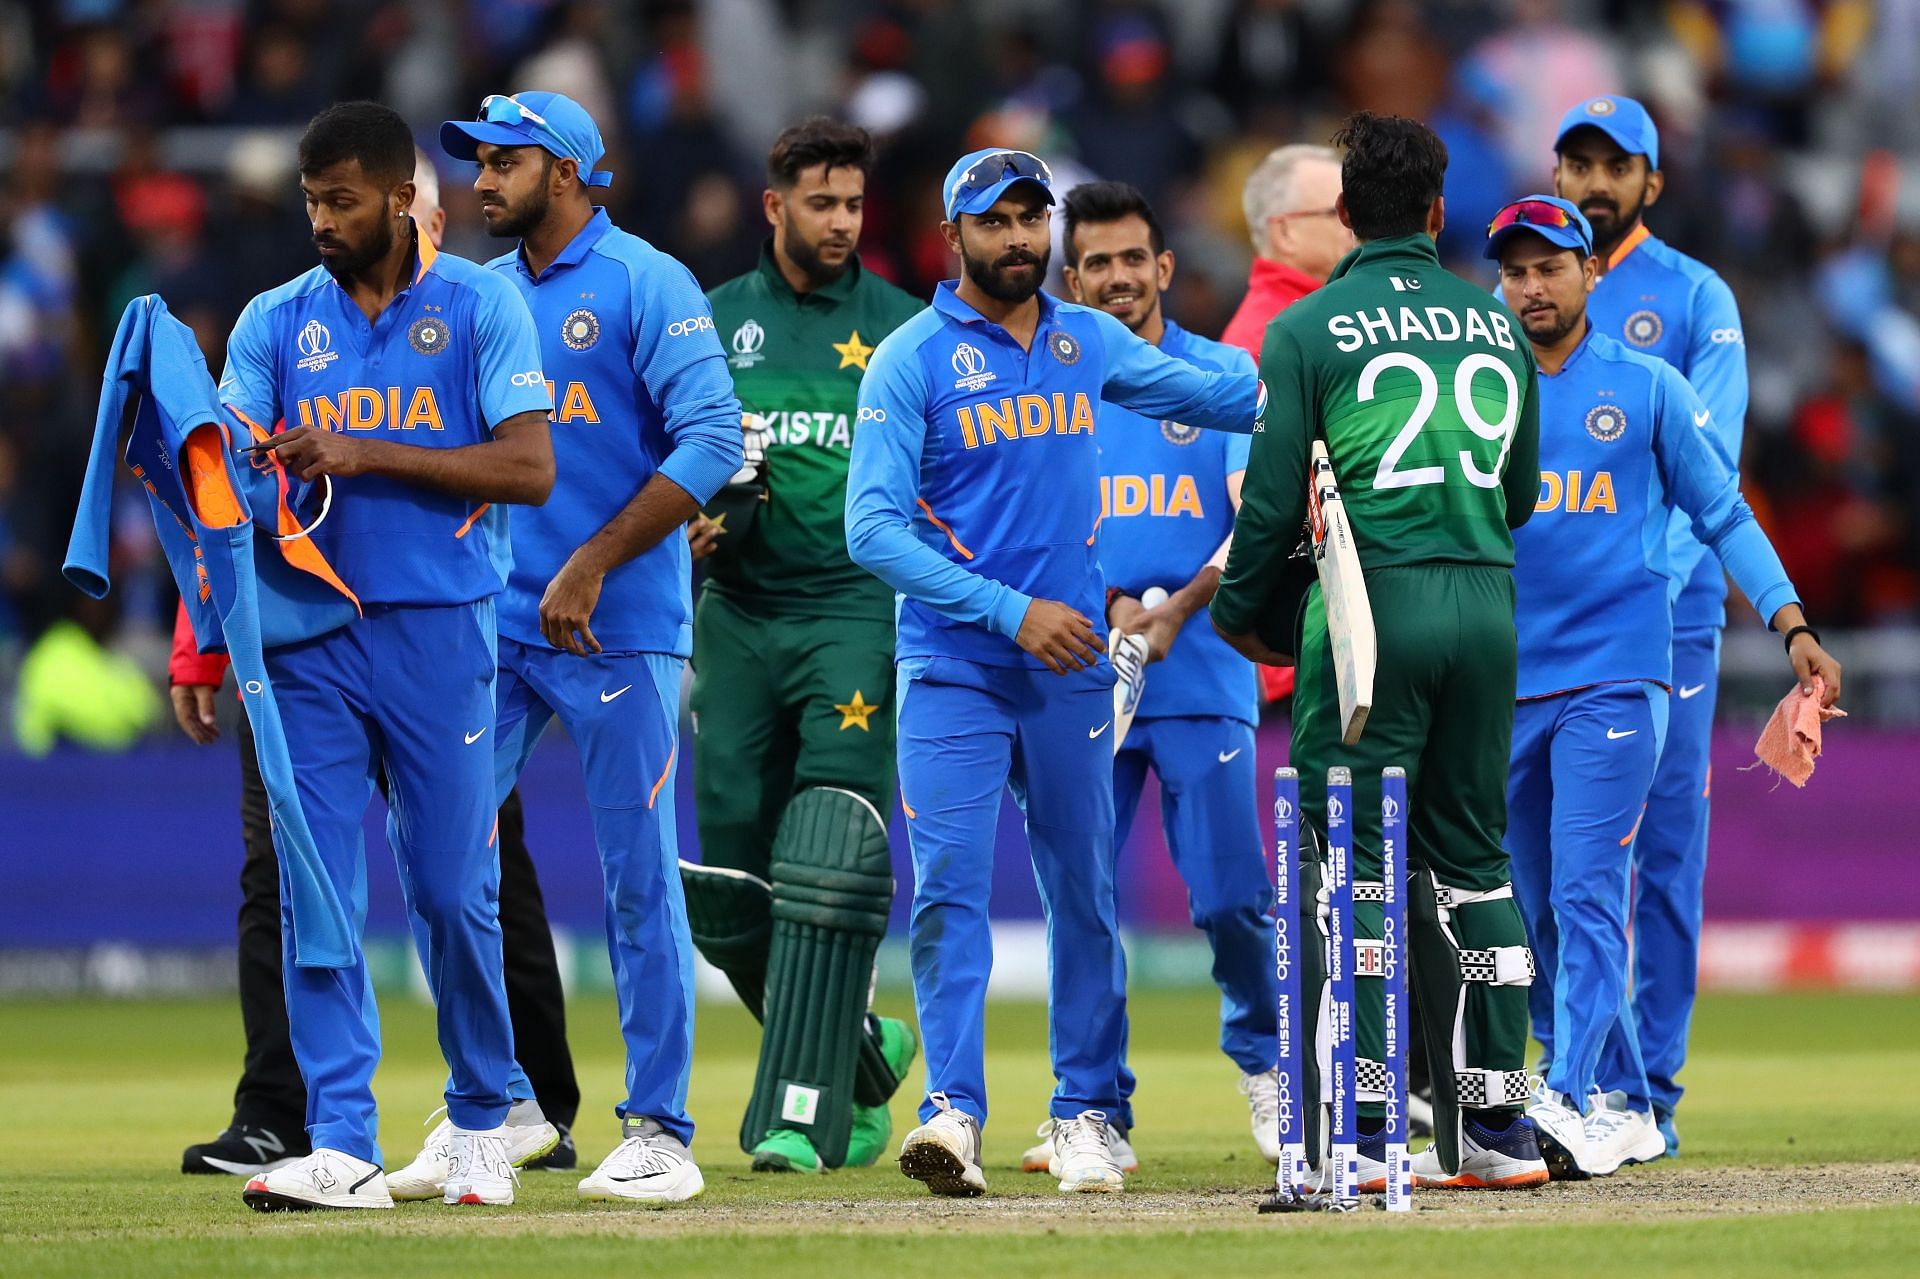 India and Pakistan players after the 2019 World Cup clash. Pic: Getty Images